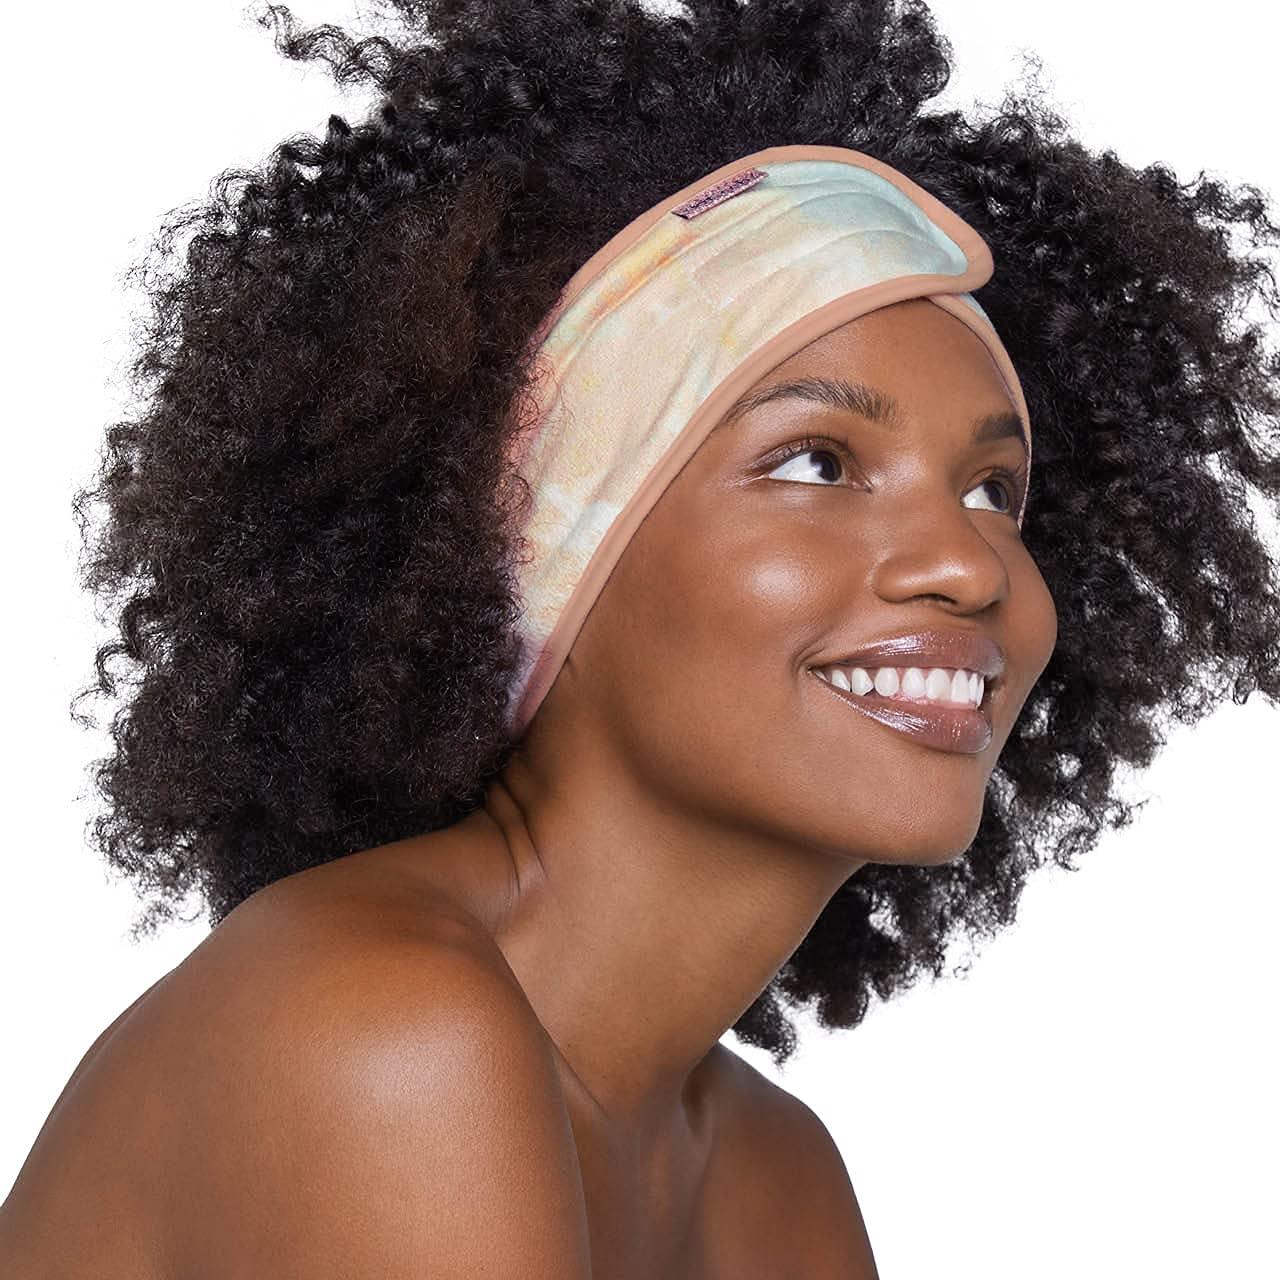 Beauty products by Esme and Elodie and Kitsch like a microfiber hair wrap